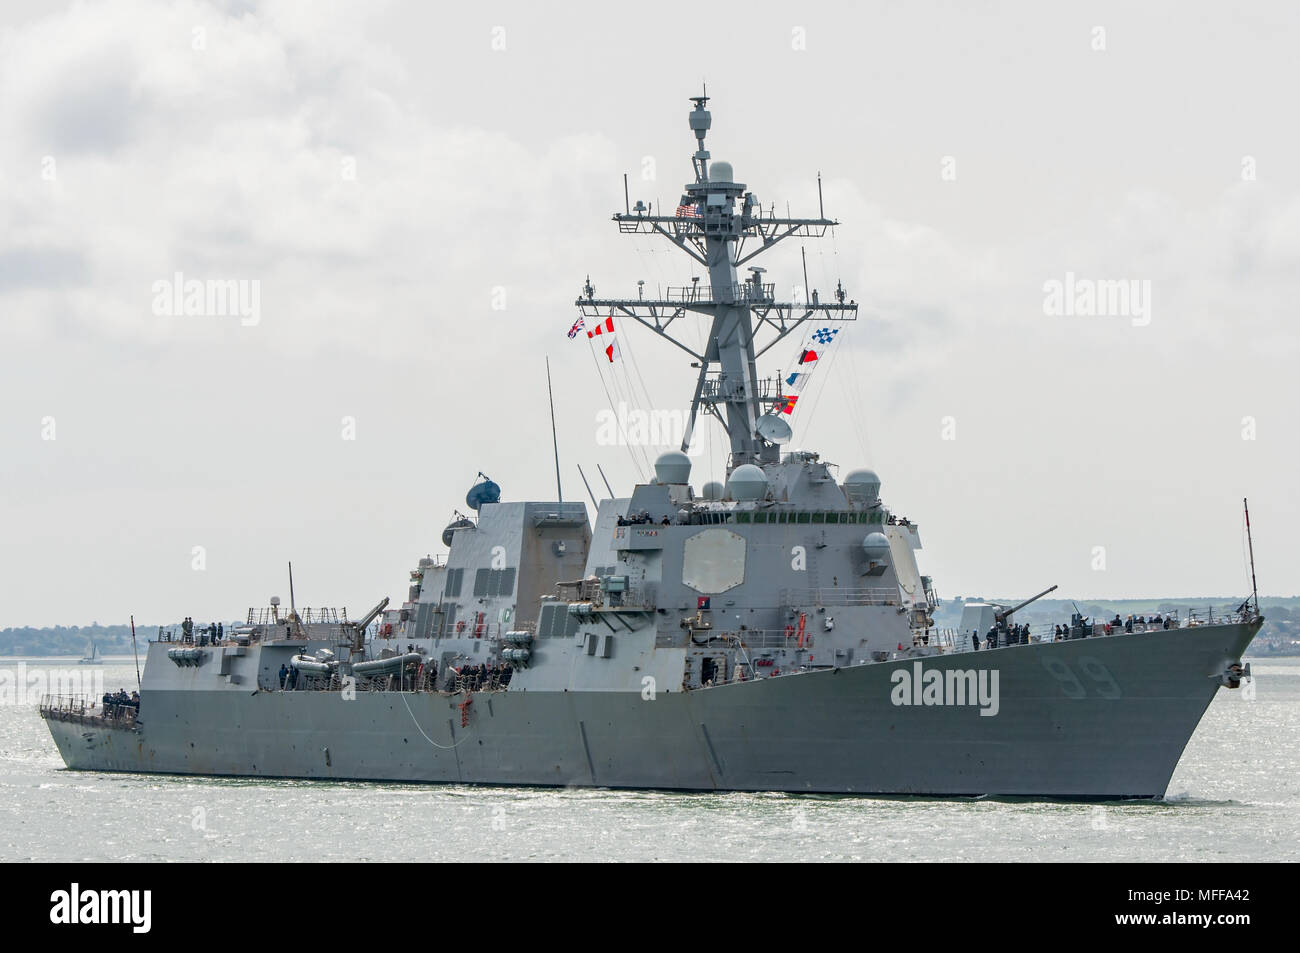 The US Navy Arleigh Burke Class Destroyer, USS Farragut (DDG 99) arriving at Portsmouth, UK on the 23rd April 2018. Stock Photo